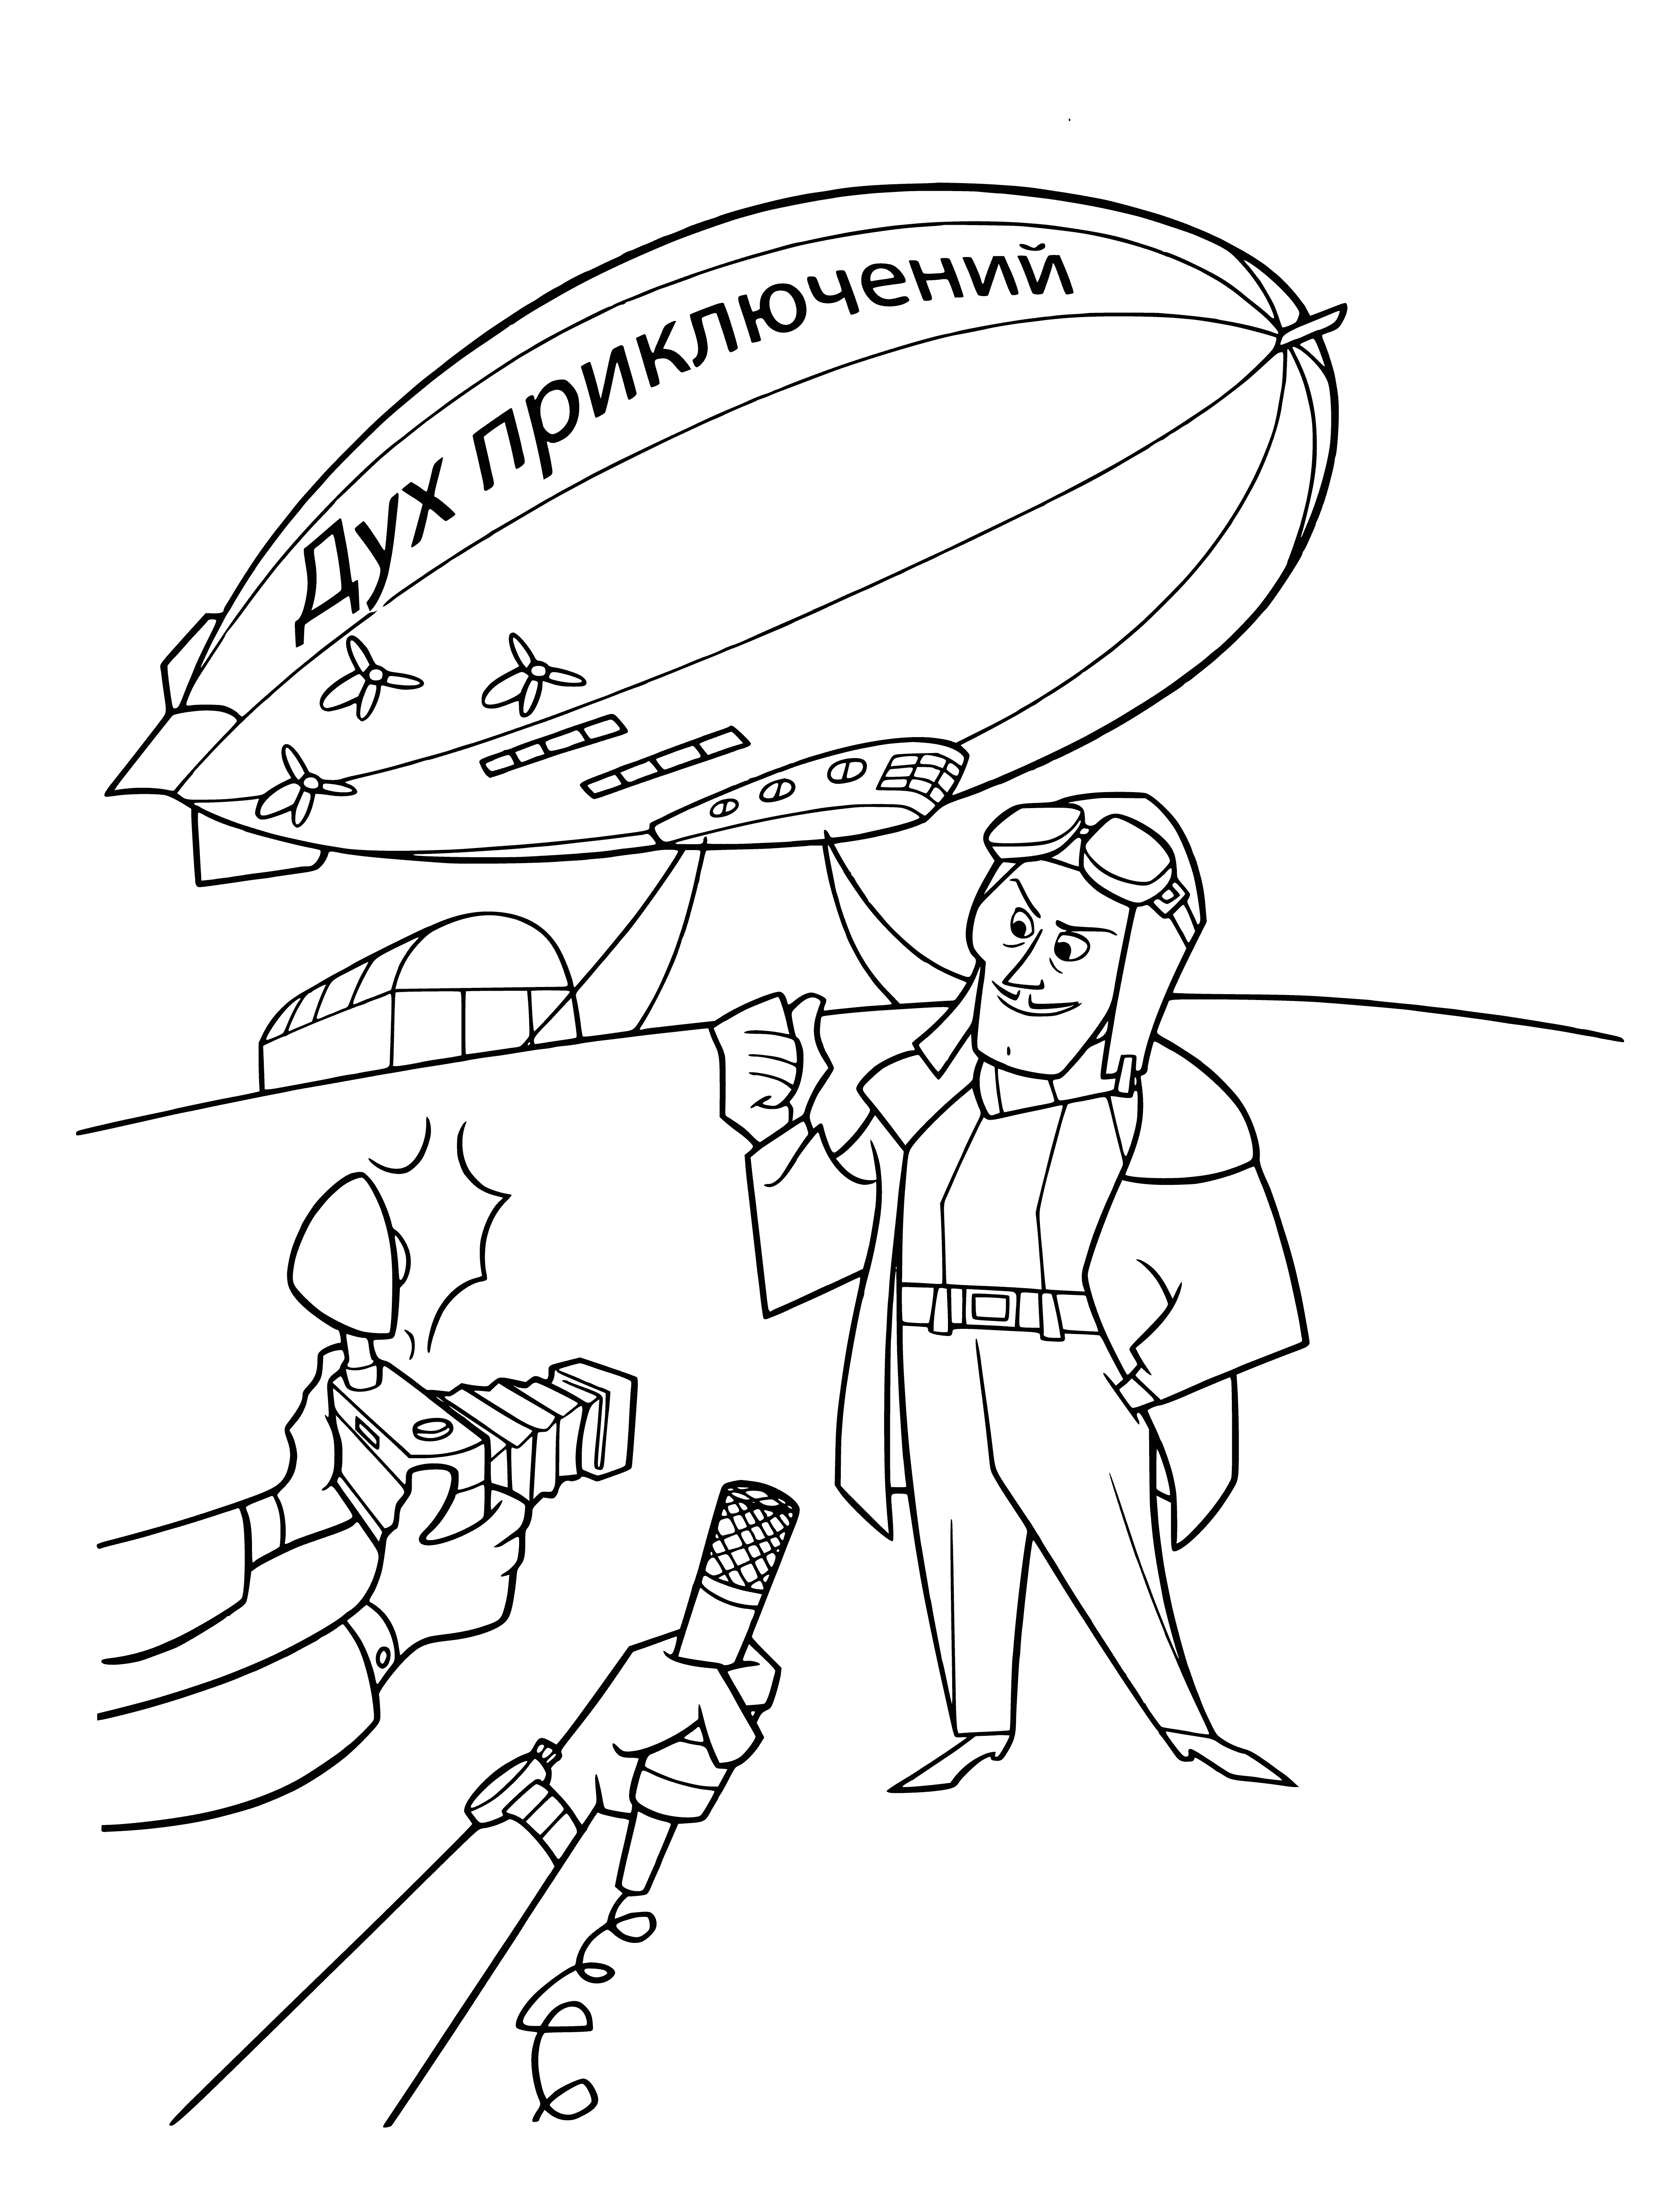 Famous balloonist coloring page